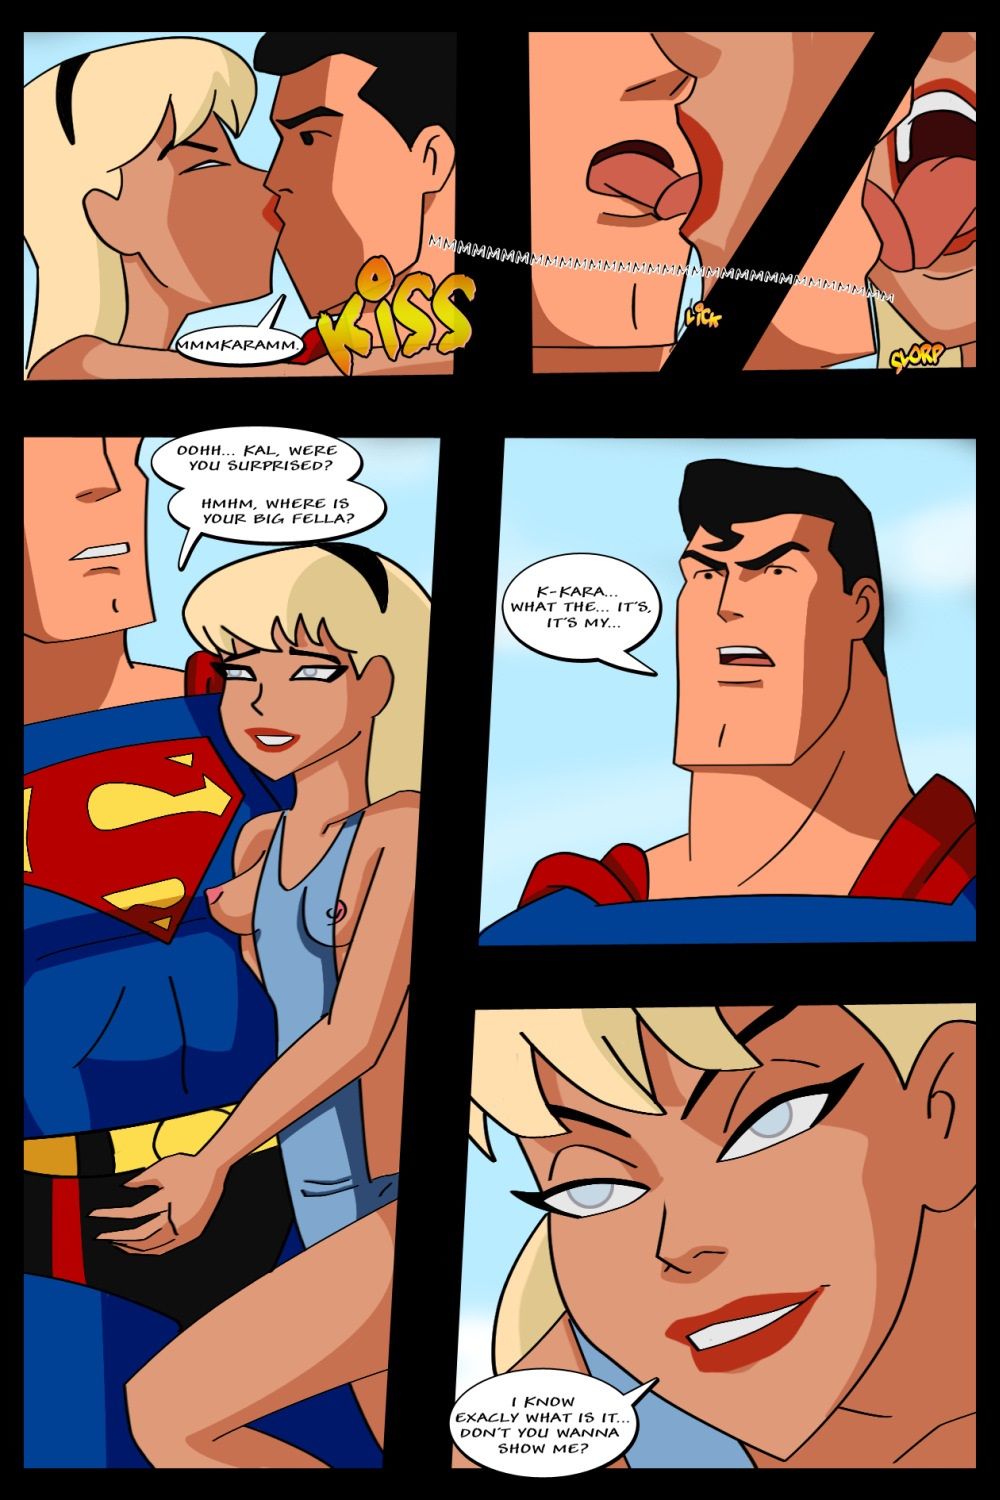 Hent-Supergirl Adventures Ch. 2-Horny Little Girl (Superman) page 4